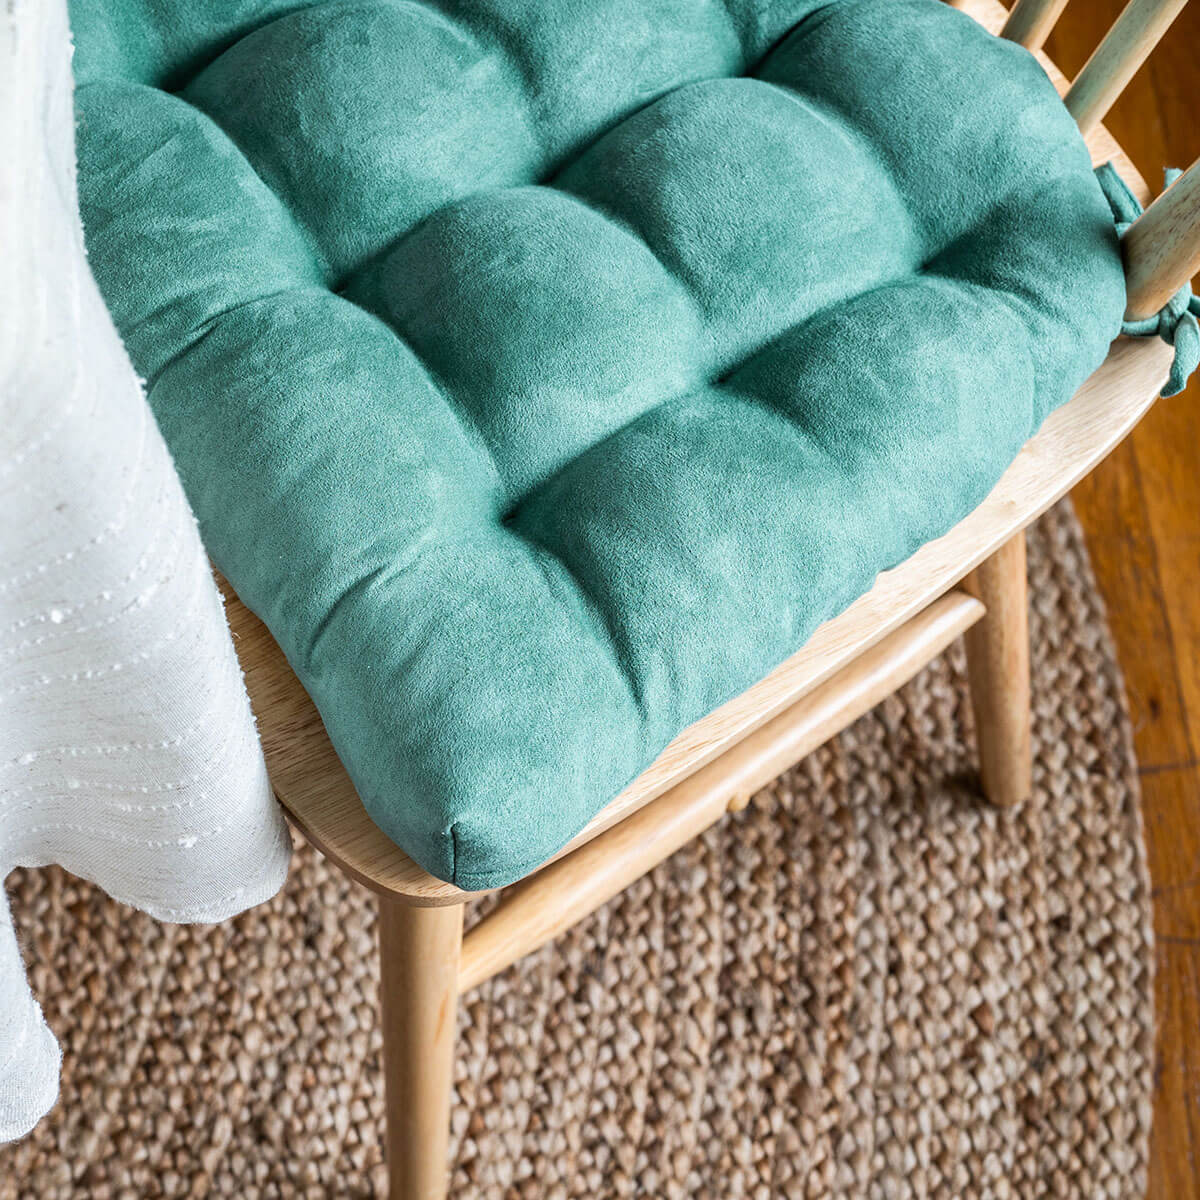 close up detail view of turquoise vegan suede dining room chair cushions